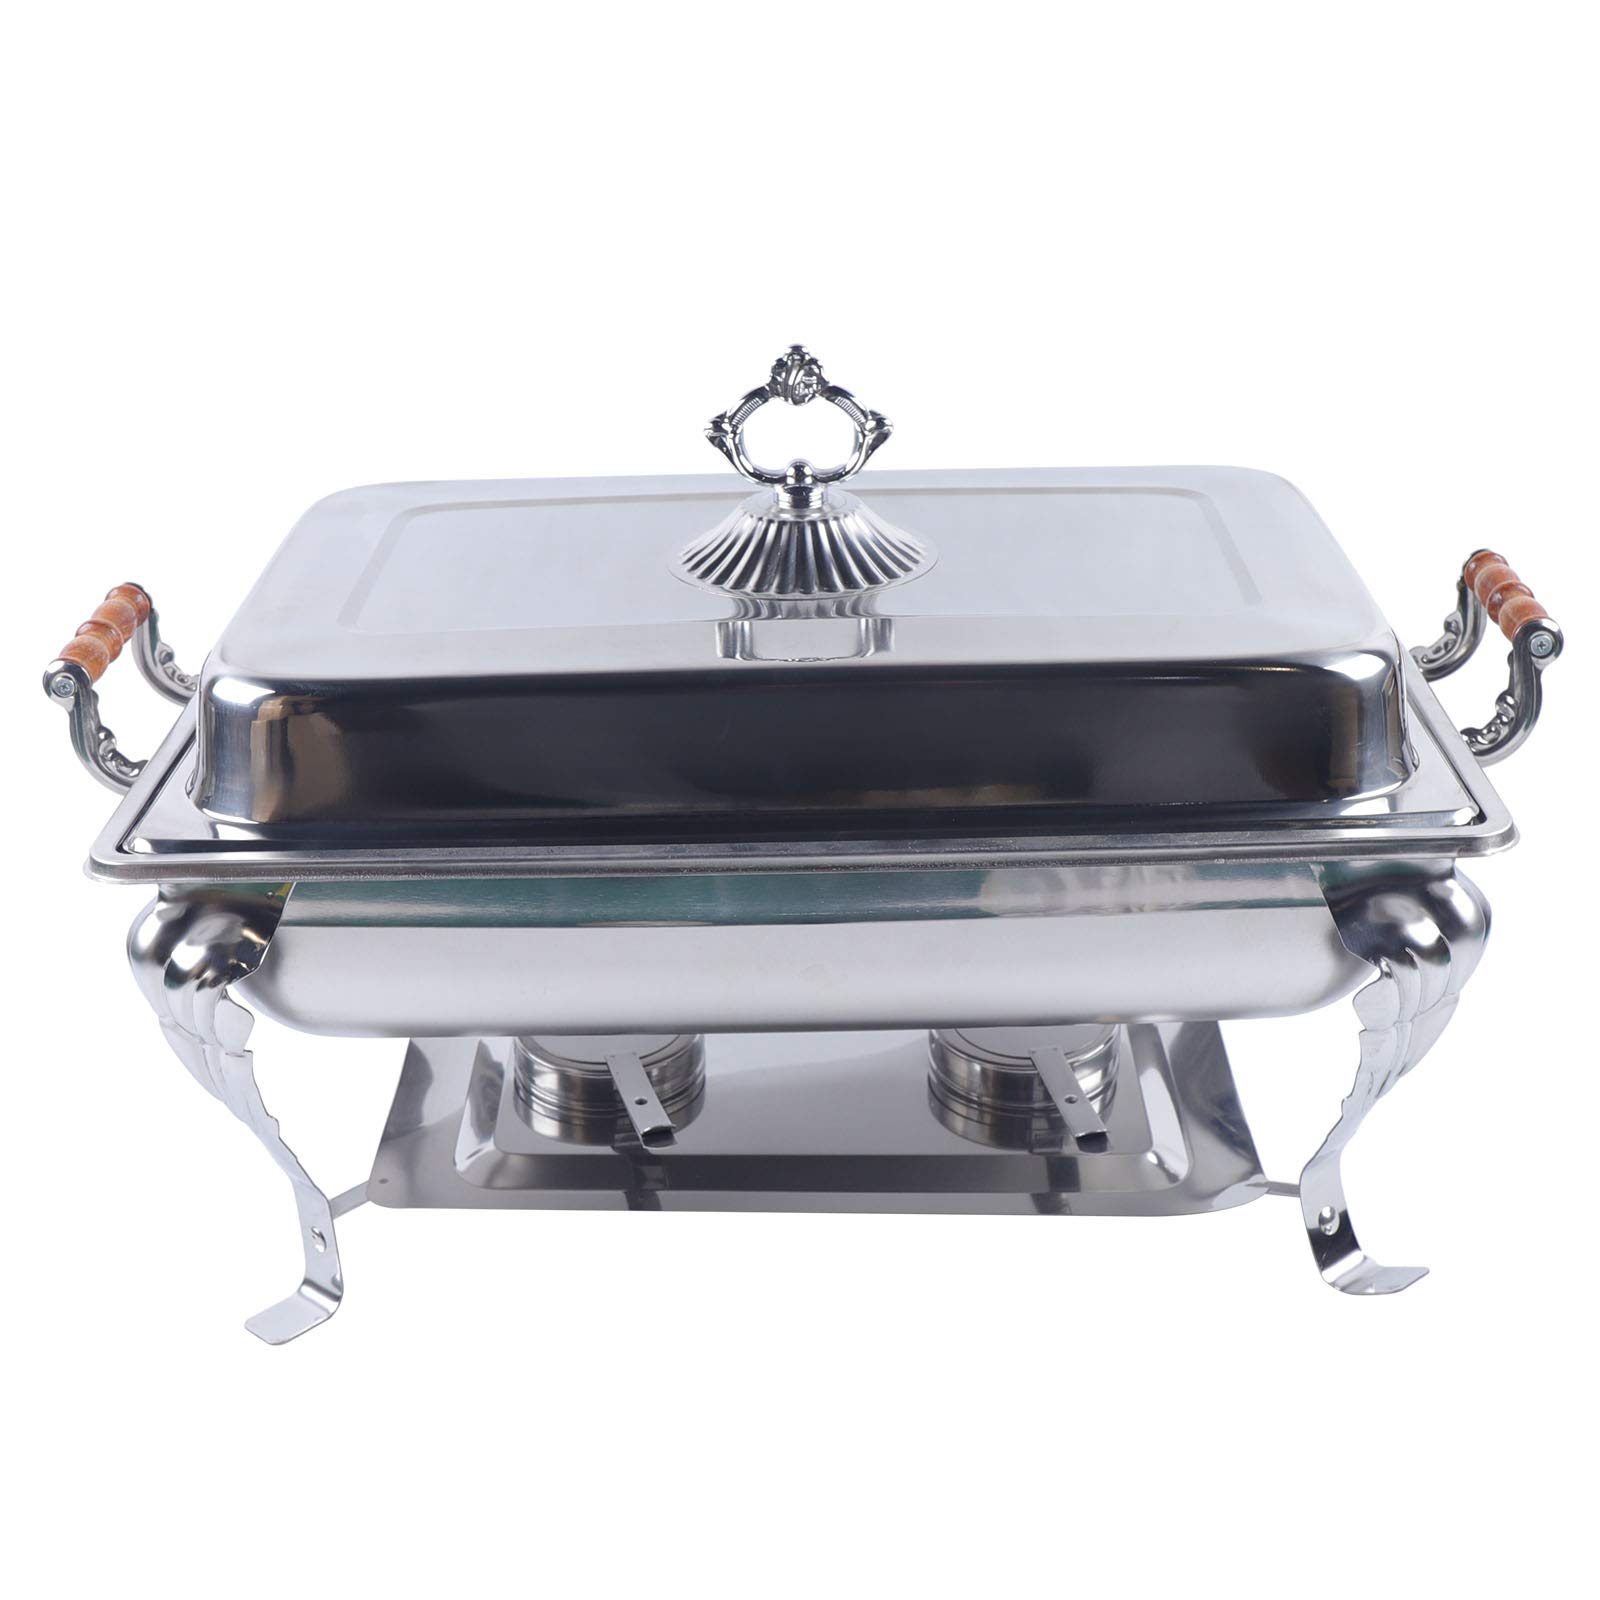 NeNchengLi Stainless Steel Chafing Dish Warming Container Chafing Dish Buffet Set Stainless Steel Food Warmer Food Insulation Parties Buffet Server Pan Warming Tray